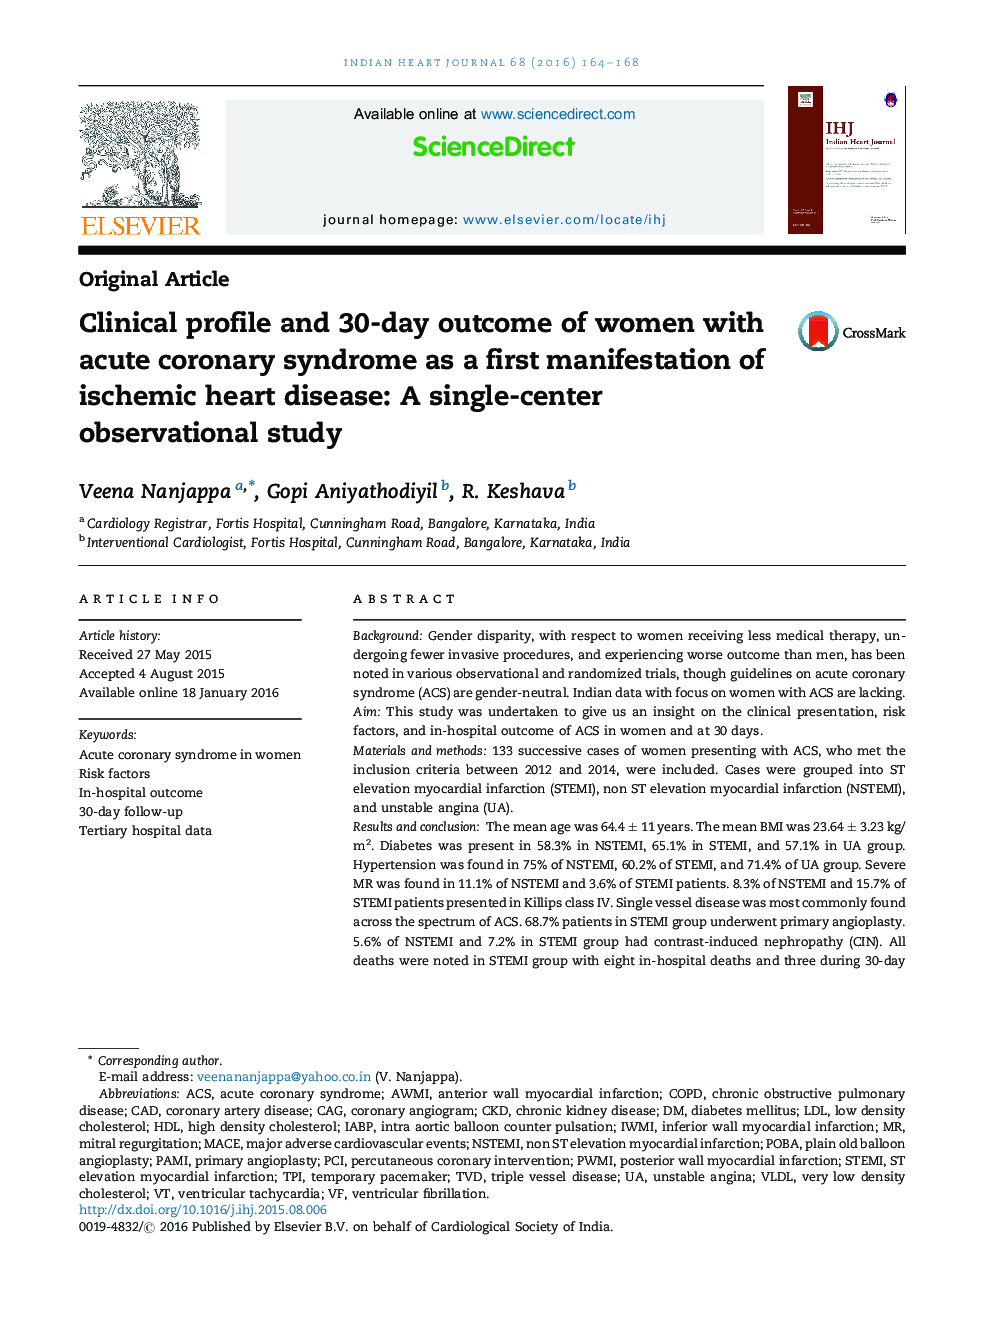 Clinical profile and 30-day outcome of women with acute coronary syndrome as a first manifestation of ischemic heart disease: A single-center observational study